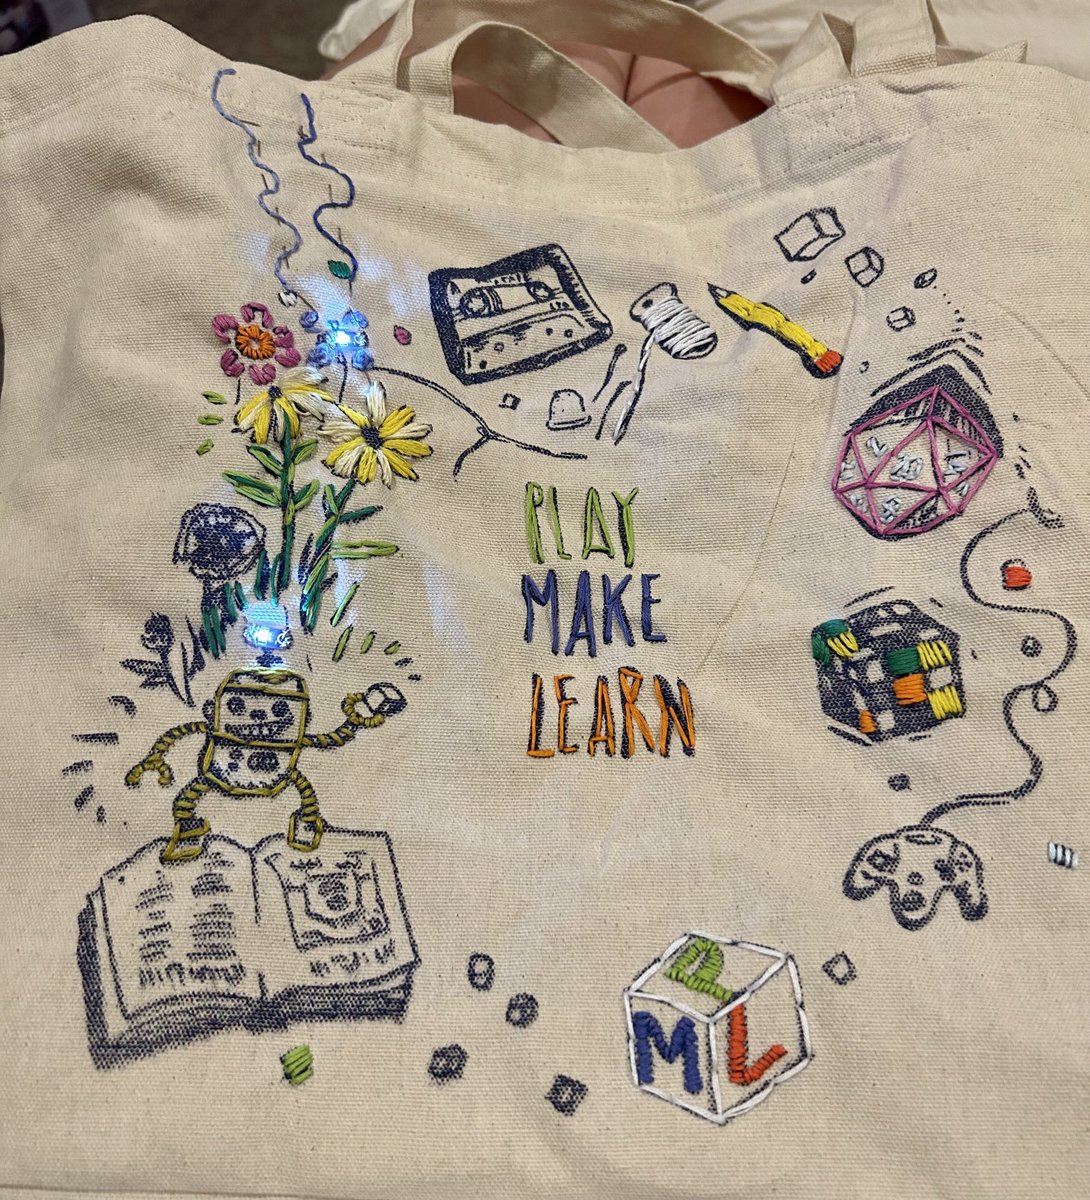 I was finally able to finish the embroidery on my canvas bag. I even used a sewable circuit to add some lights. This is a great souvenir from an amazing conference!! ⁦@Play_Make_Learn⁩